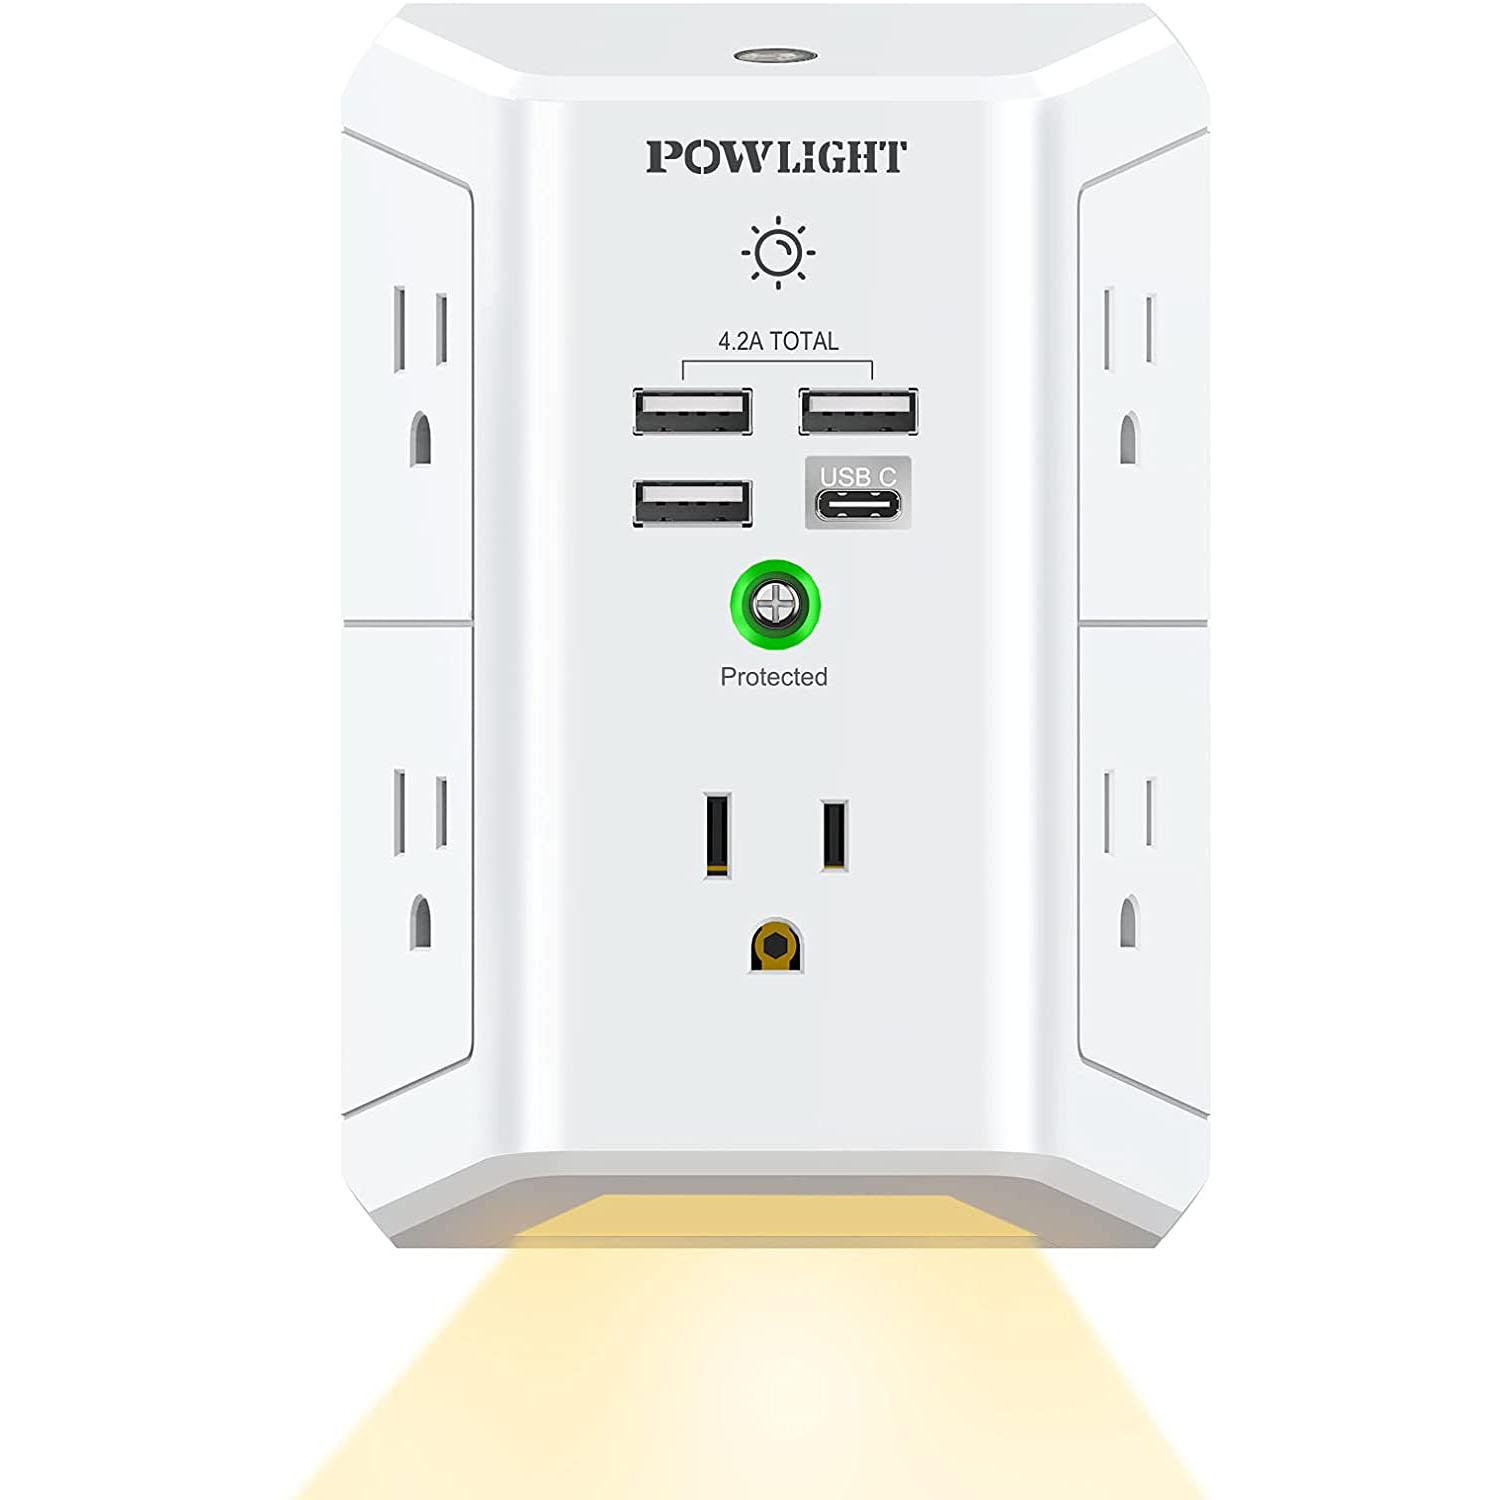 Powlight  Outlet Extender with Night Light for $11.45